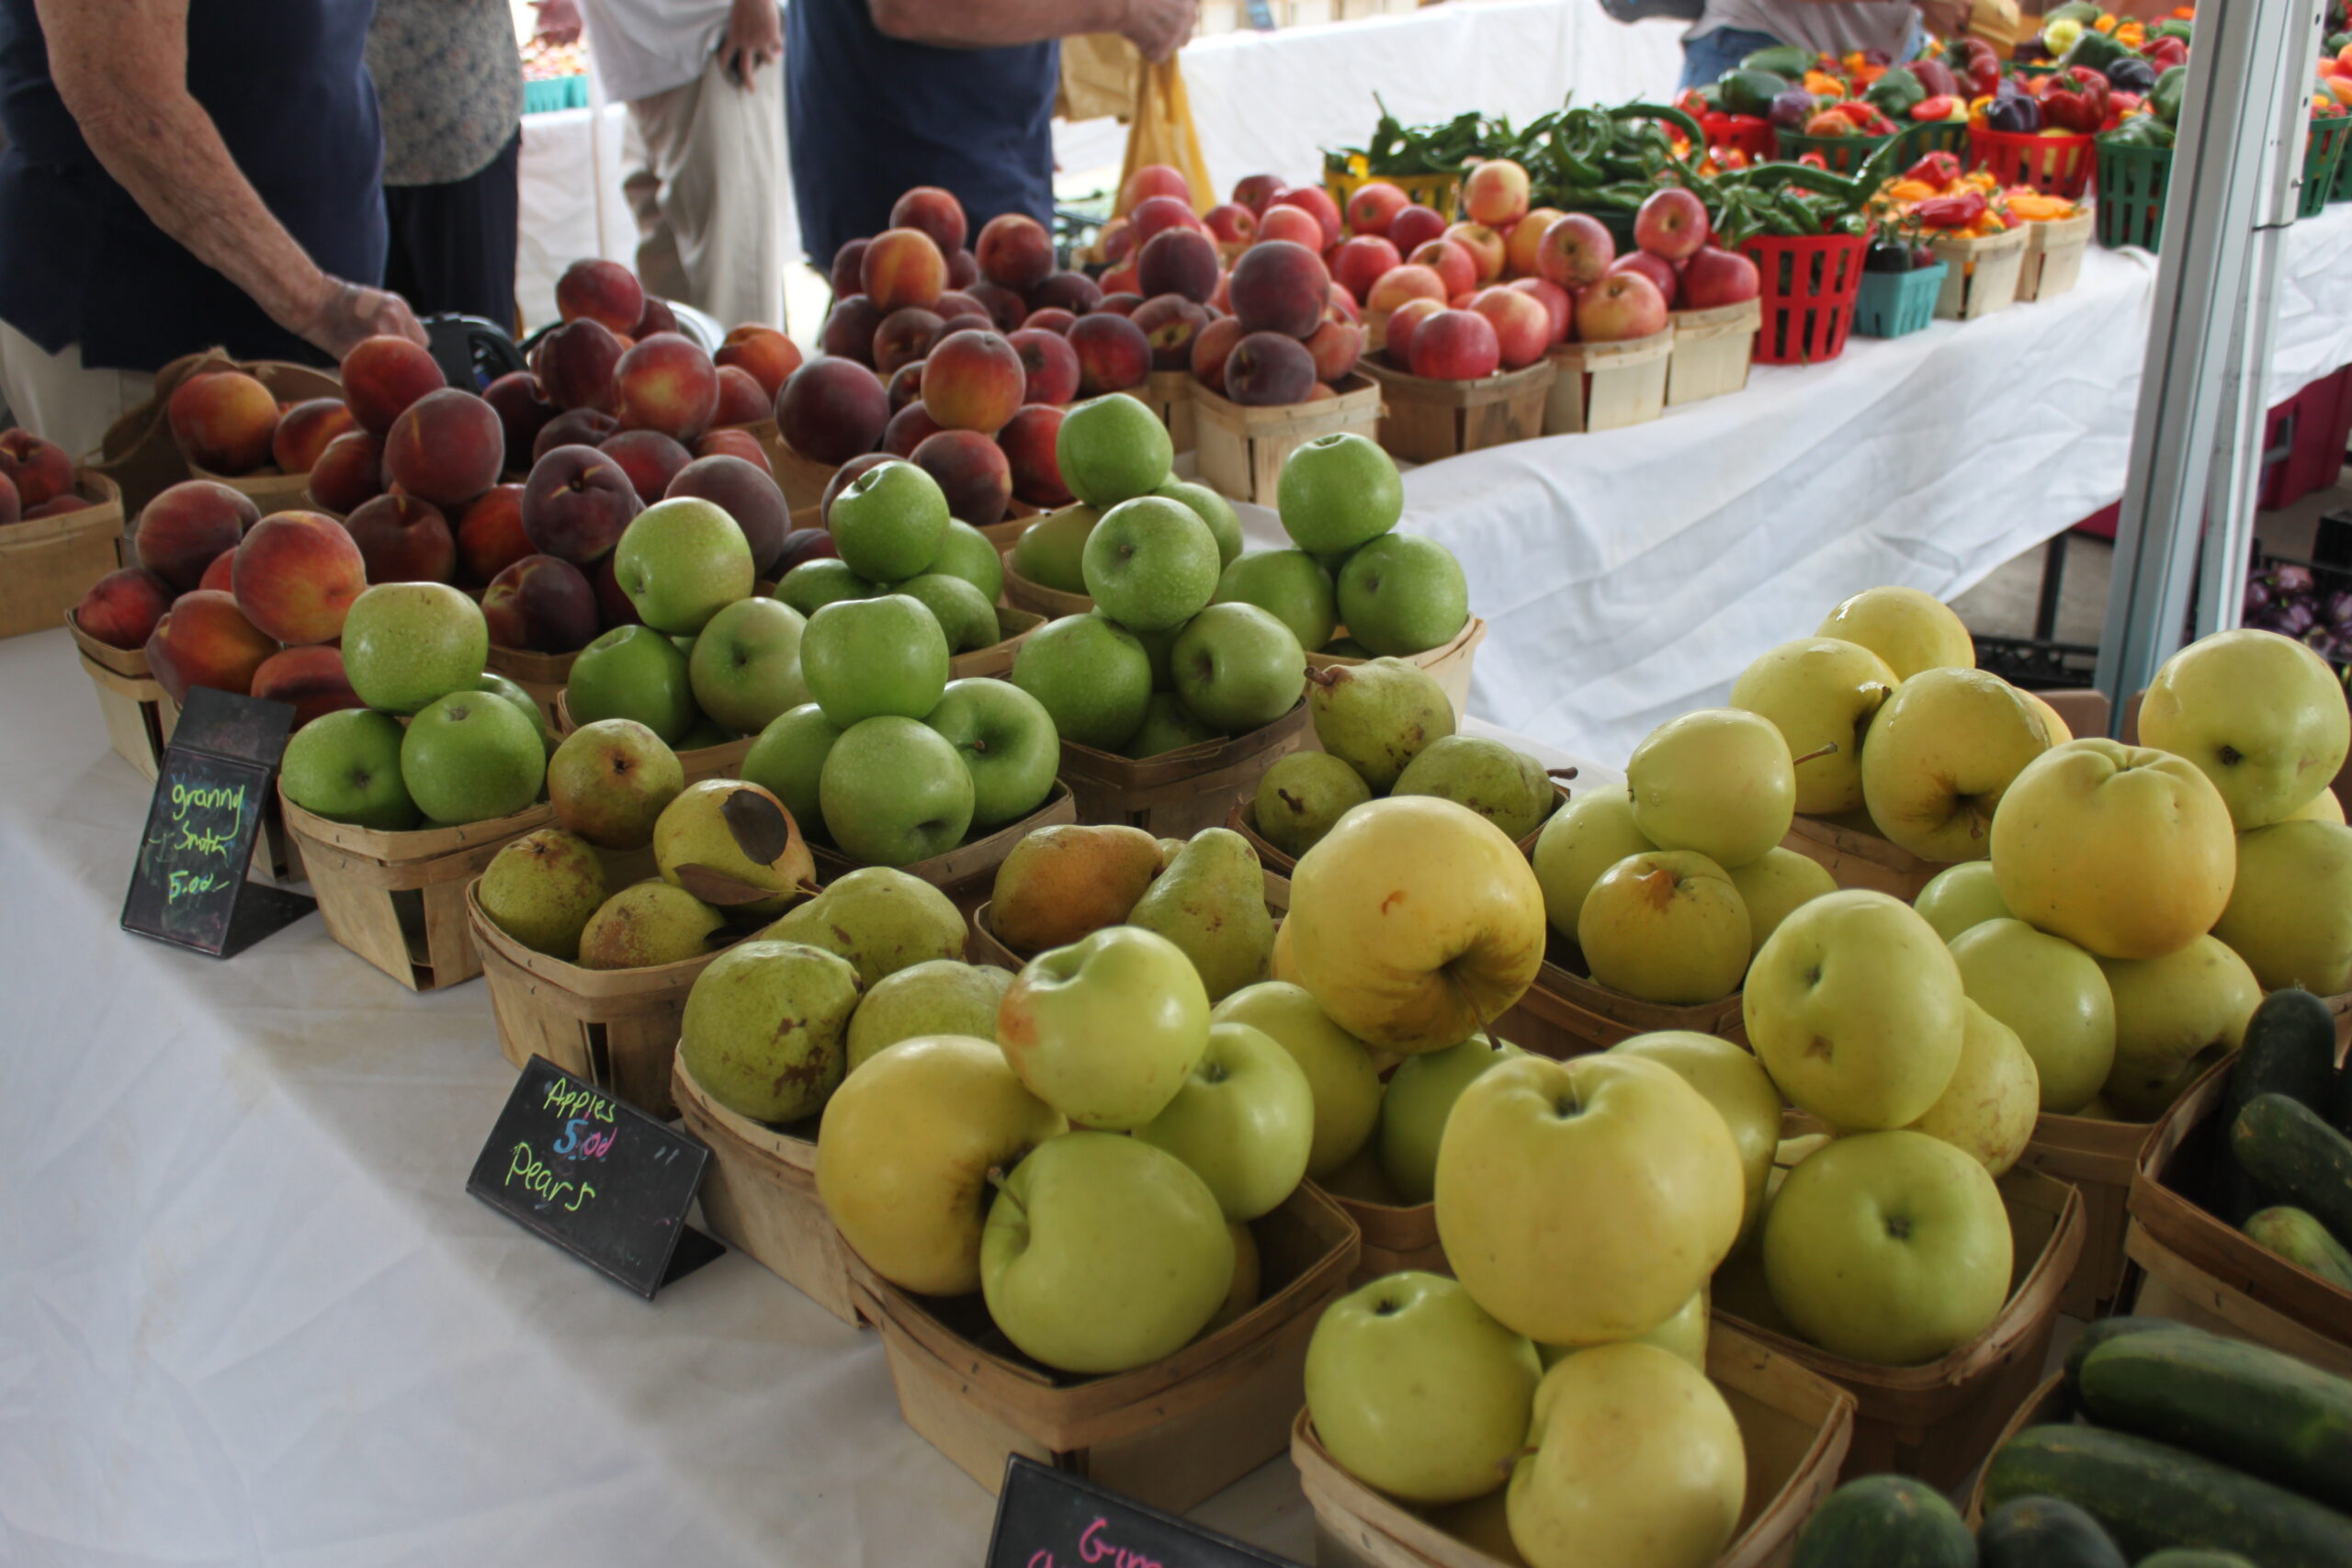 Apples at the market